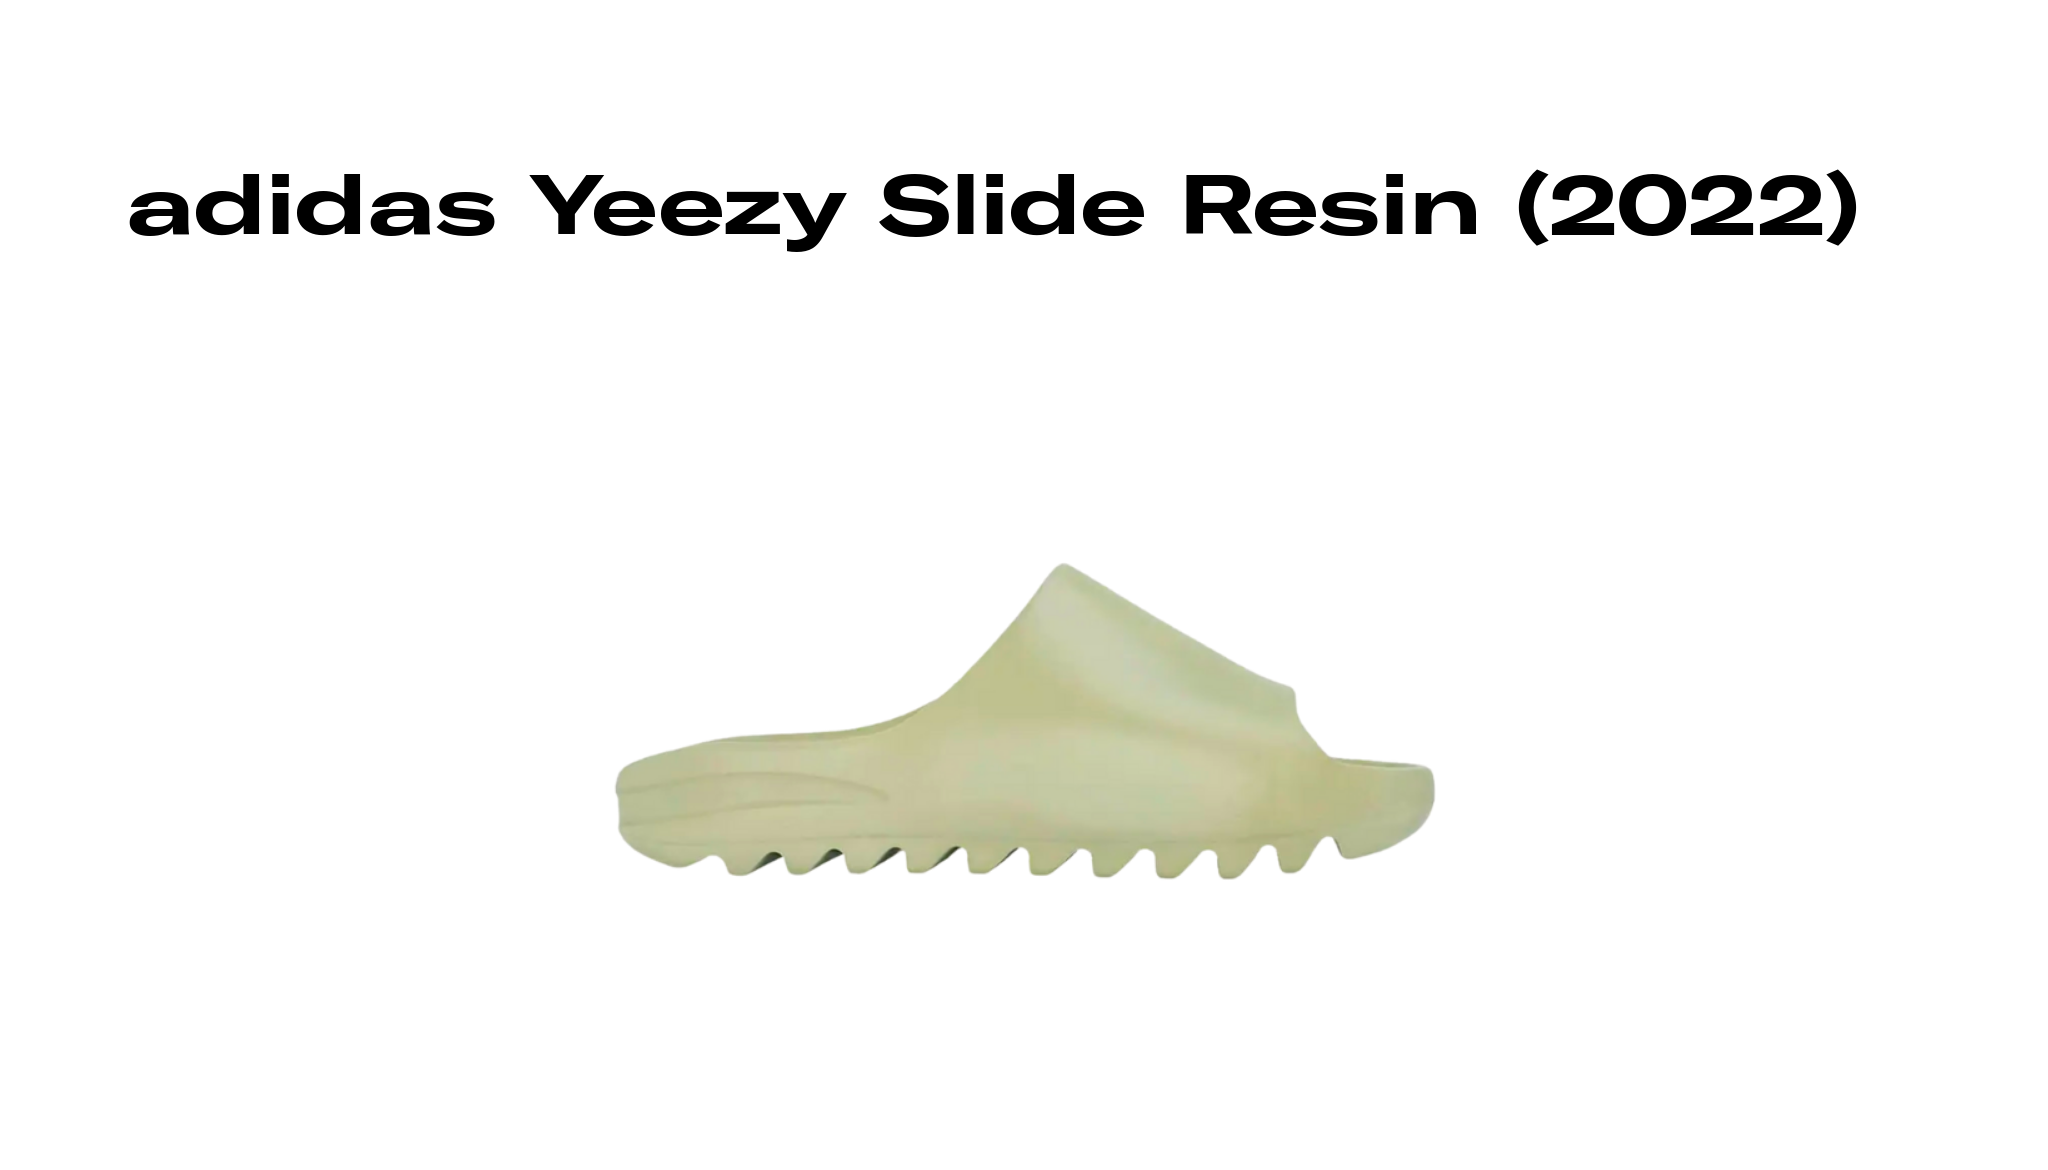 adidas Yeezy Slide Resin (2022), Raffles and Release Date | Sole 